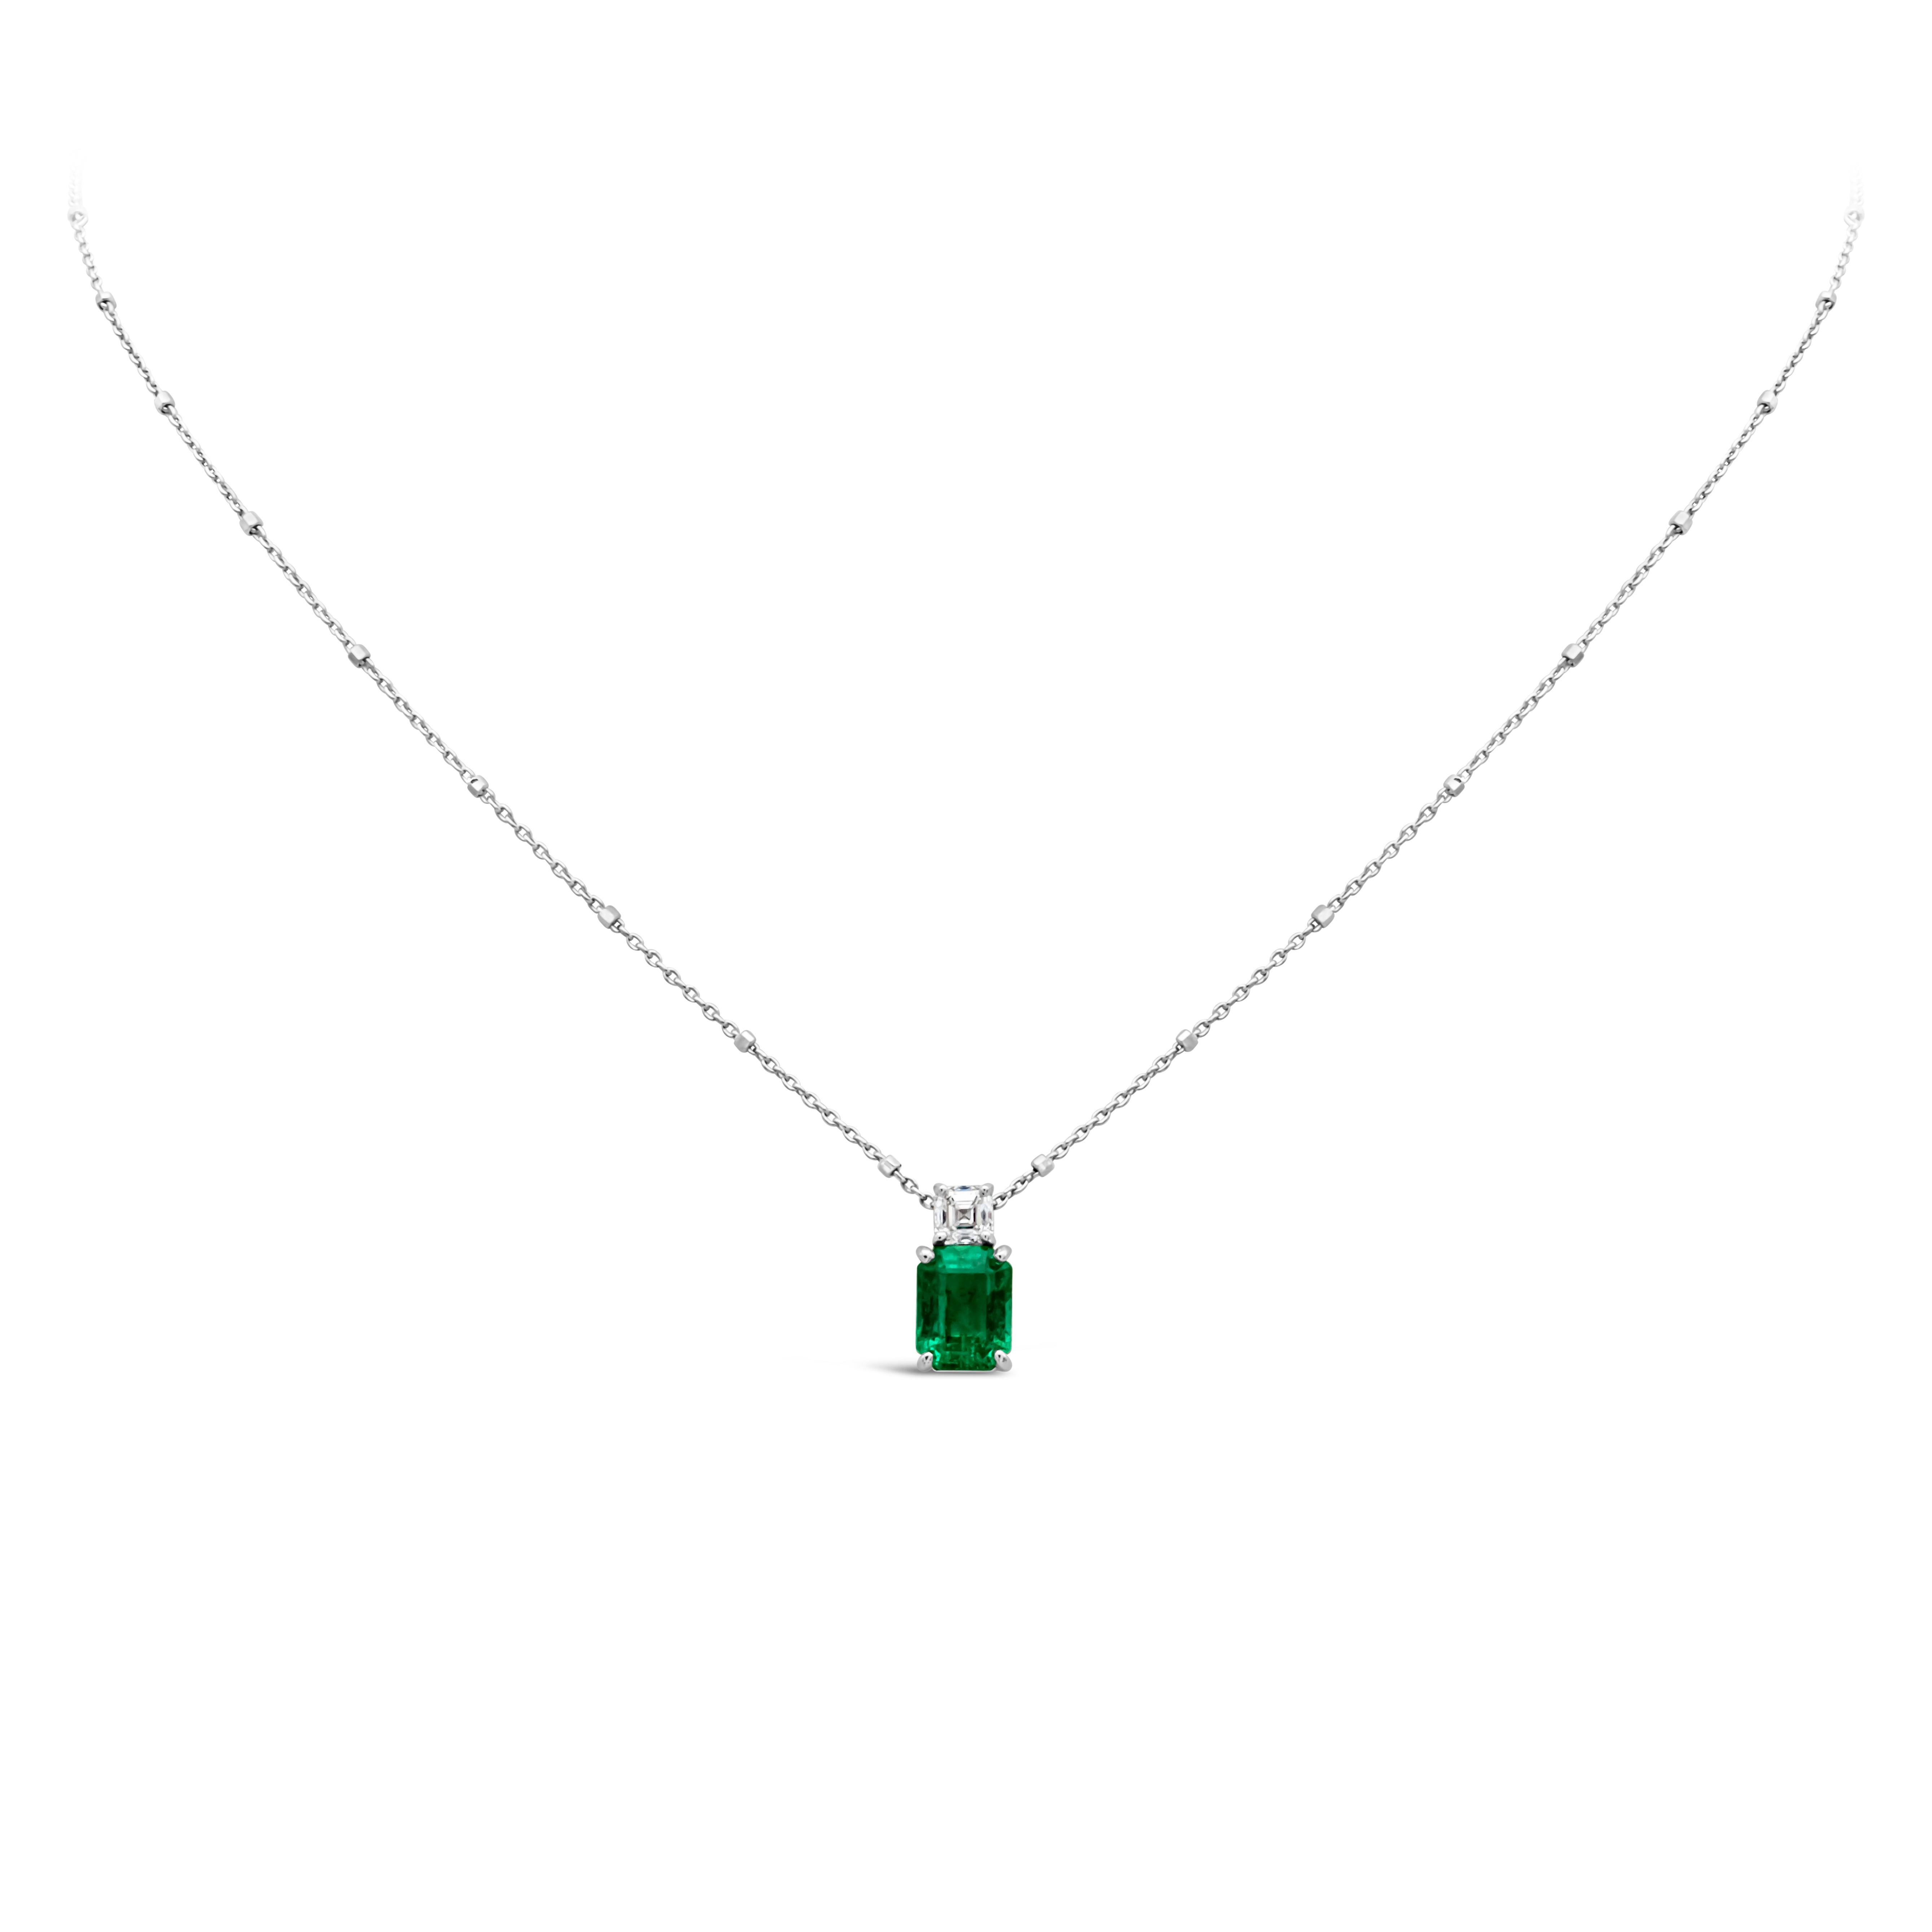 A charming color rich pendant necklace showcasing an emerald cut green emerald weighing 1.27 carats total, set in a four prong 18K white gold basket, accented by a single asscher cut diamond weighing 0.28 carat total. Suspended on a 14K White Gold